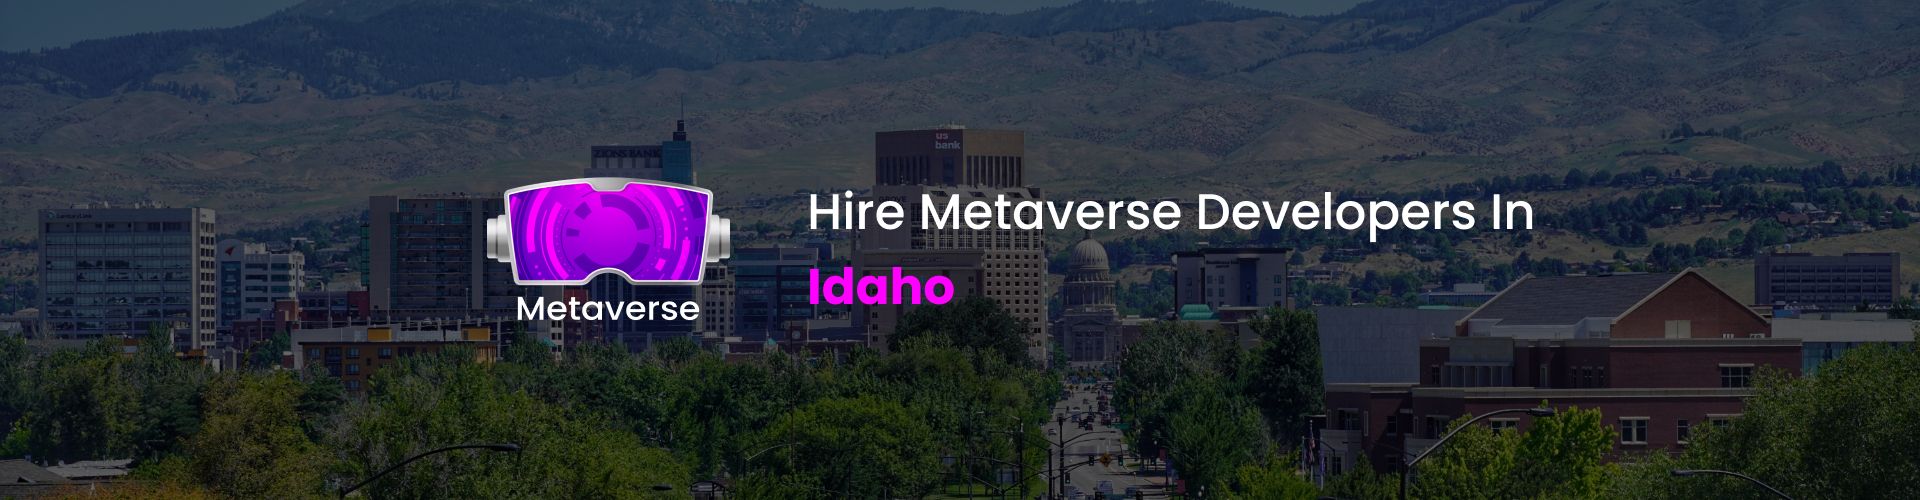 hire metaverse developers in idaho